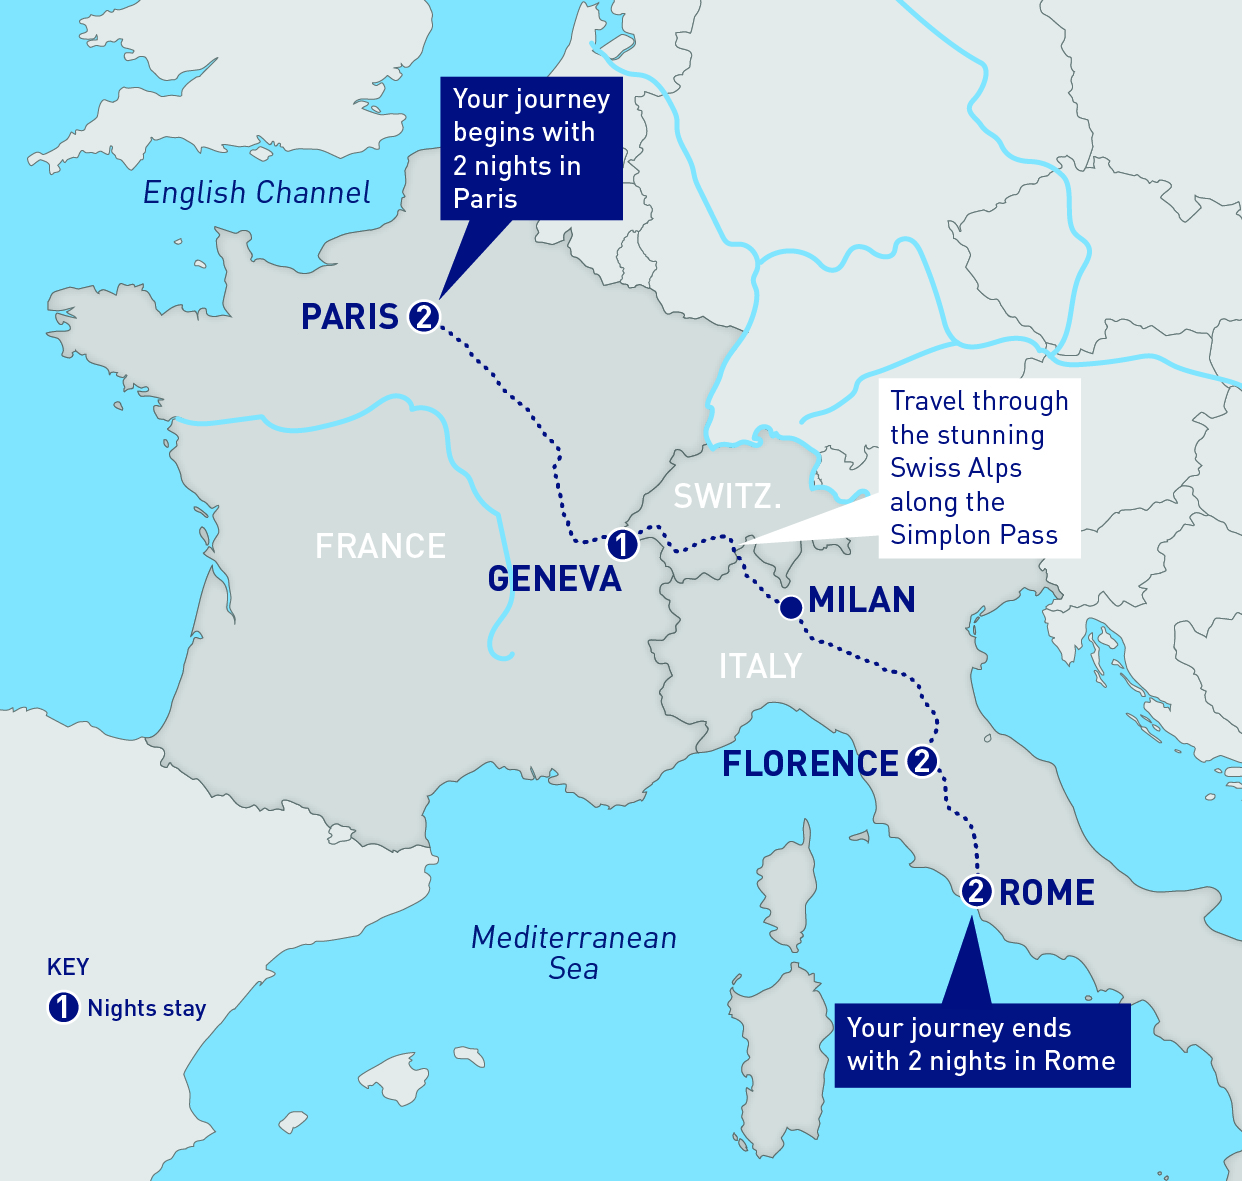 itinerary mapped out from Paris to Milan to Rome